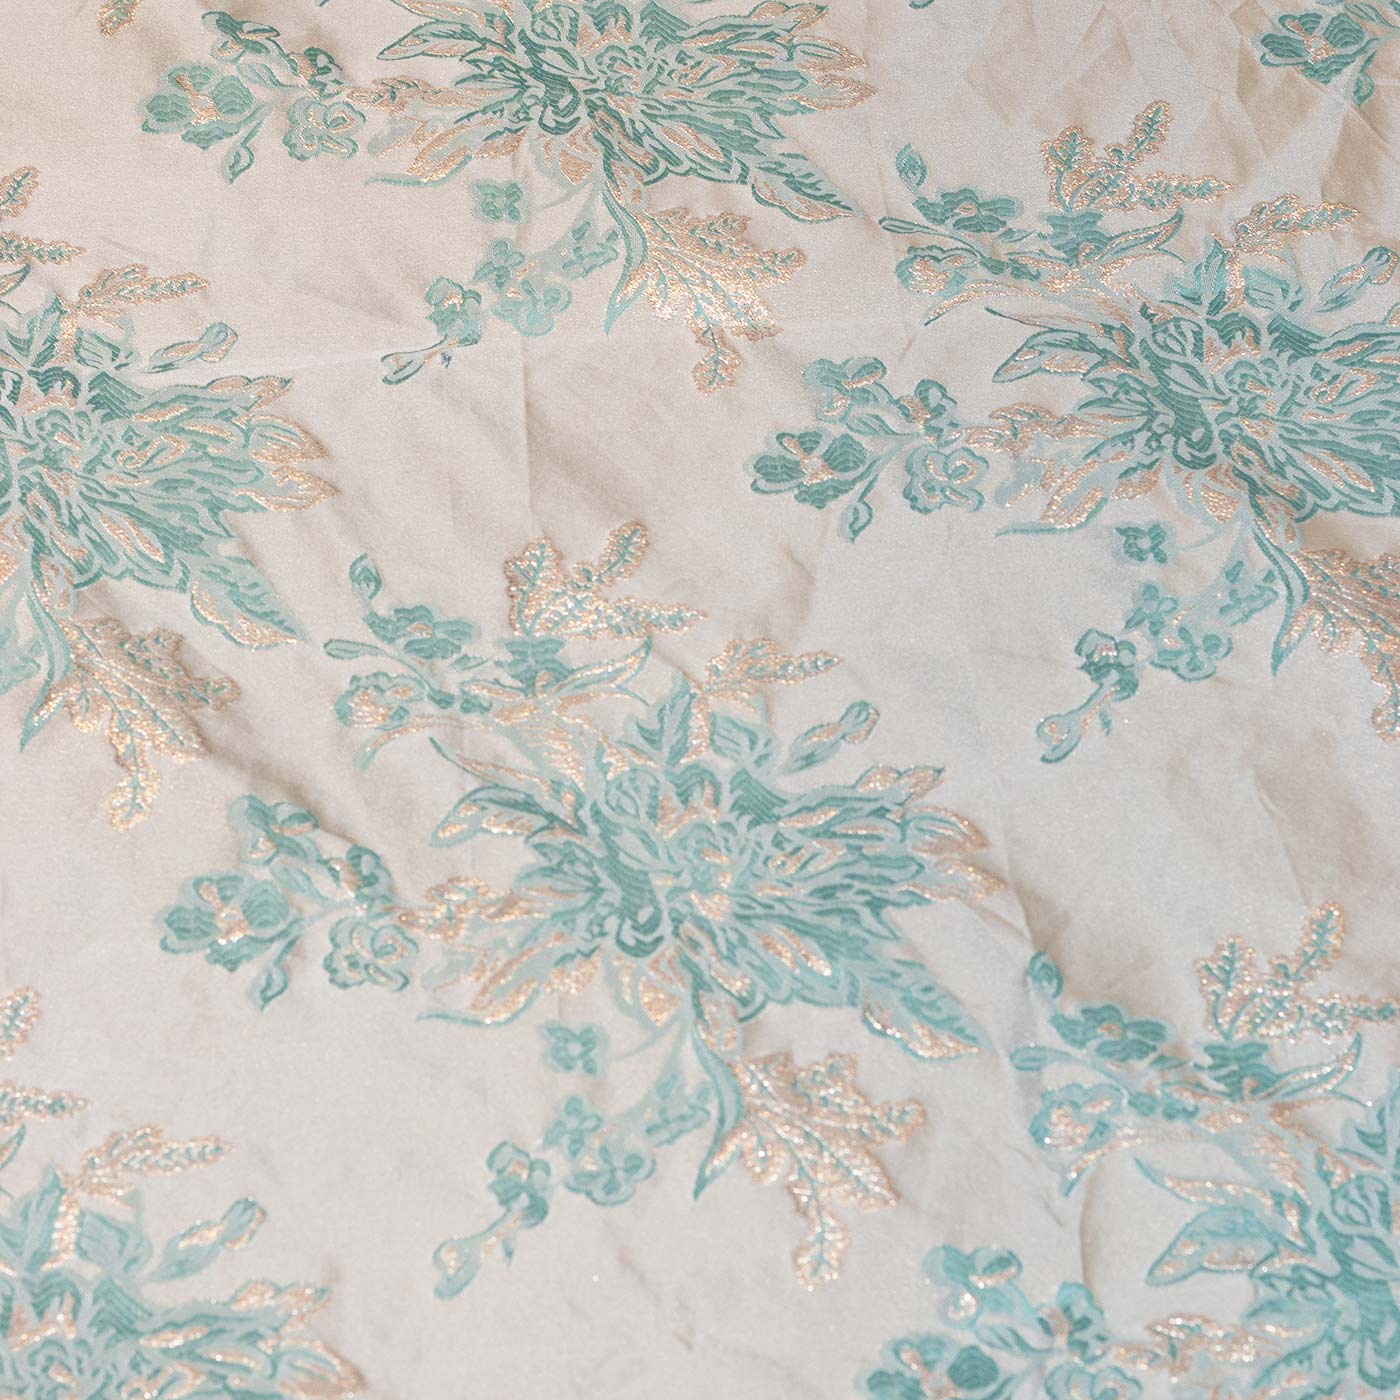 Sea Green and Silver Floral Brocade Fabric